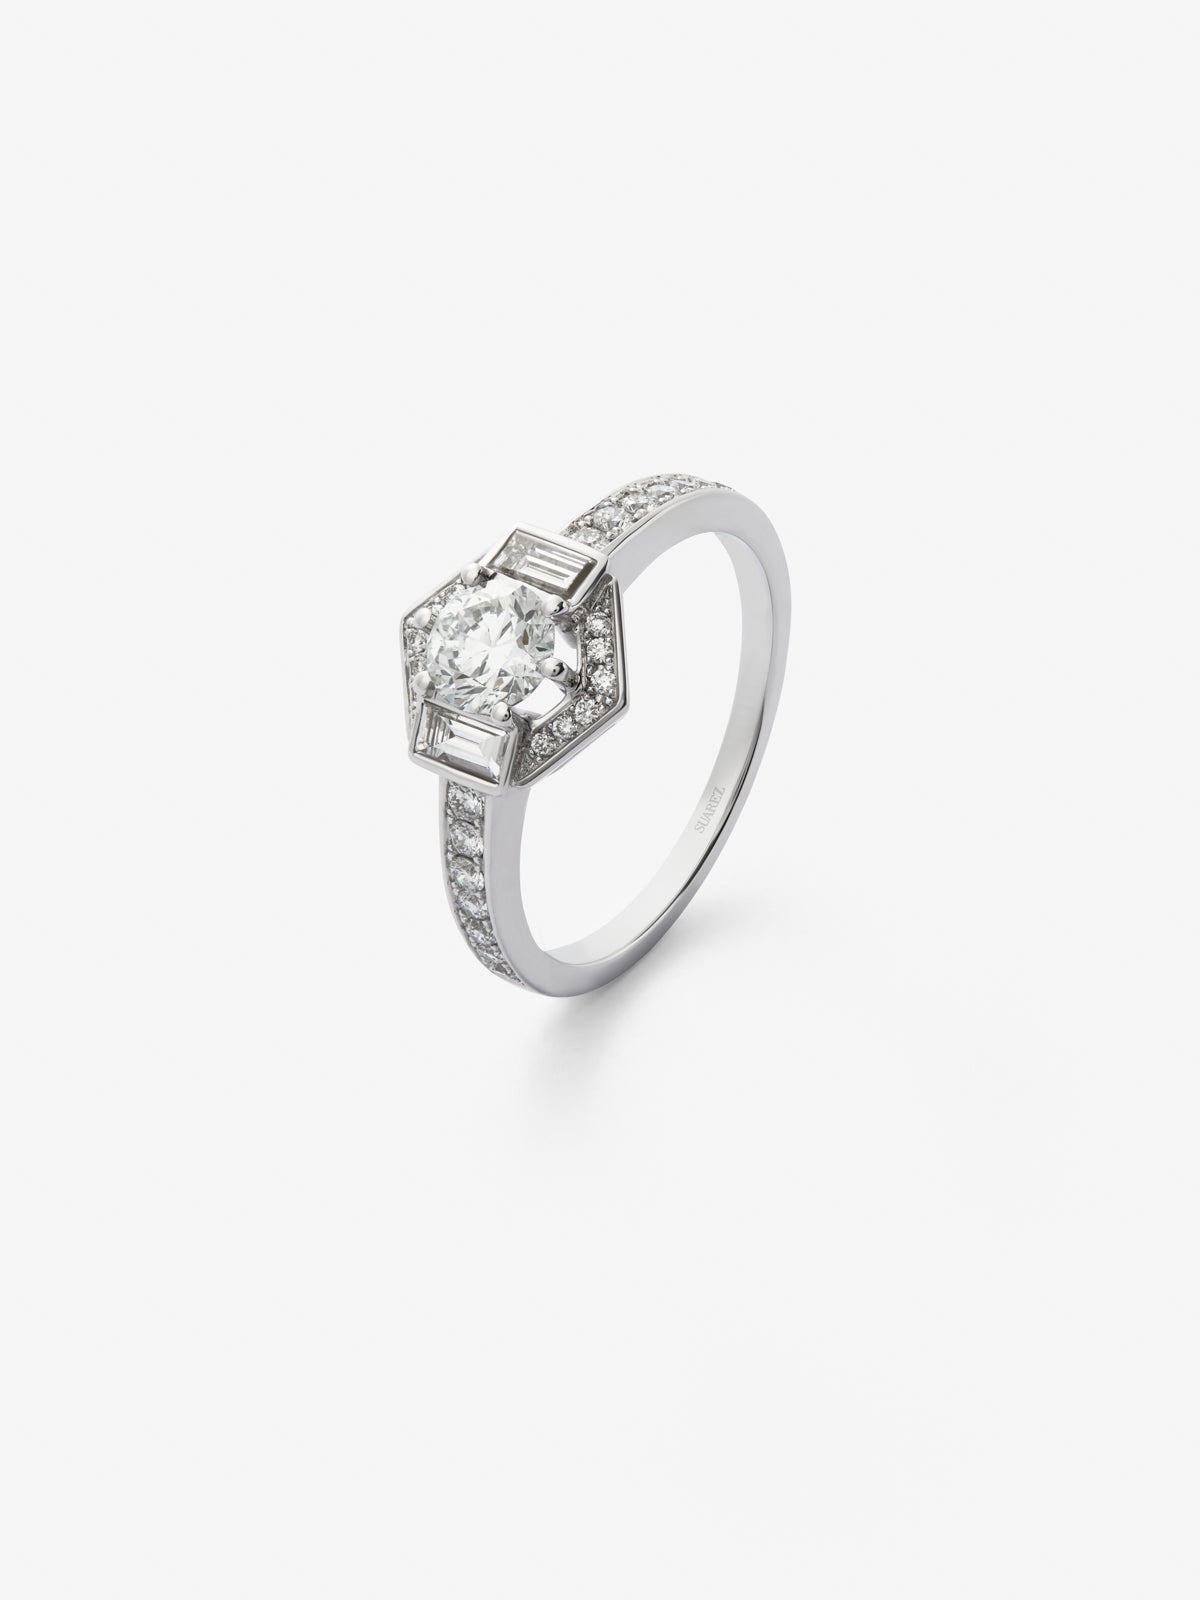 18K white gold ring with a 0.5 ct brilliant-cut central diamond; 2 in baguette cut with a total of 0.16 cts and 26 in brilliant cut with a total of 0.21 cts